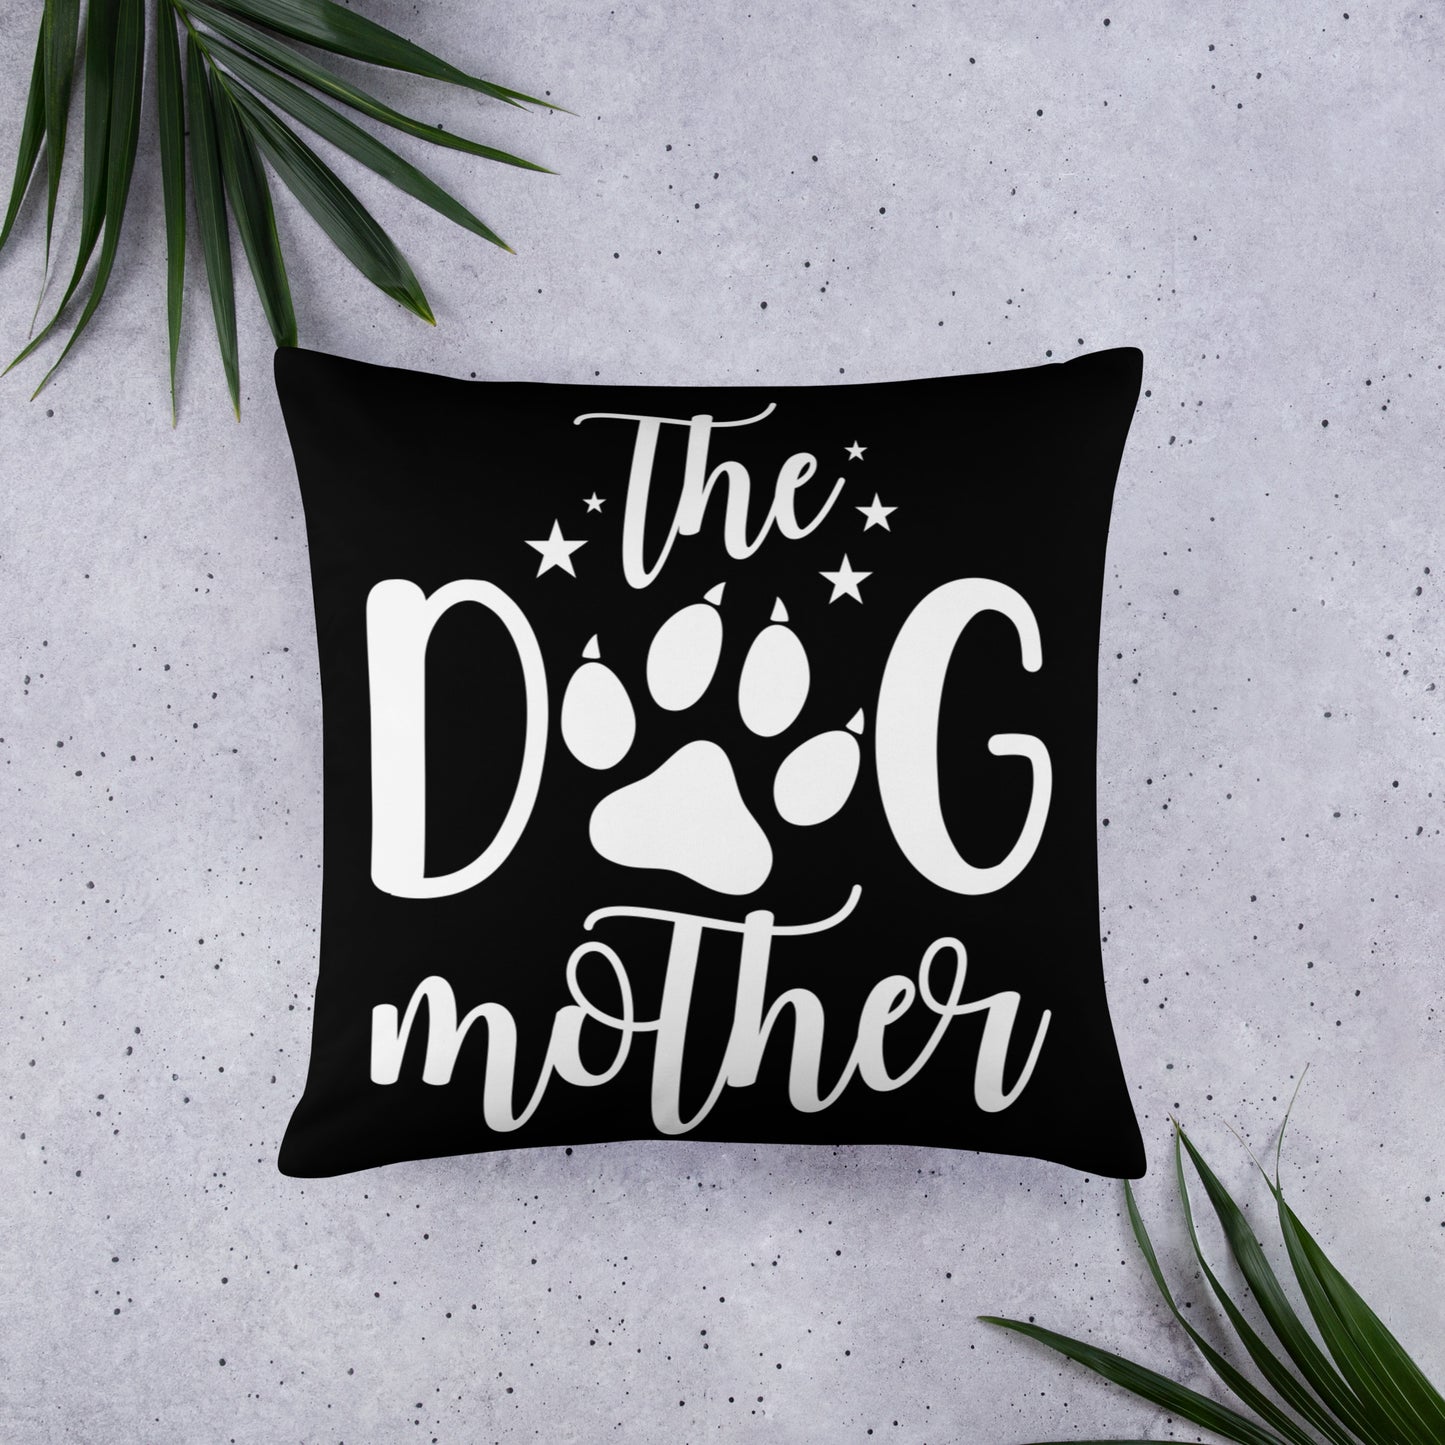 The Dog Mother Basic Pillow